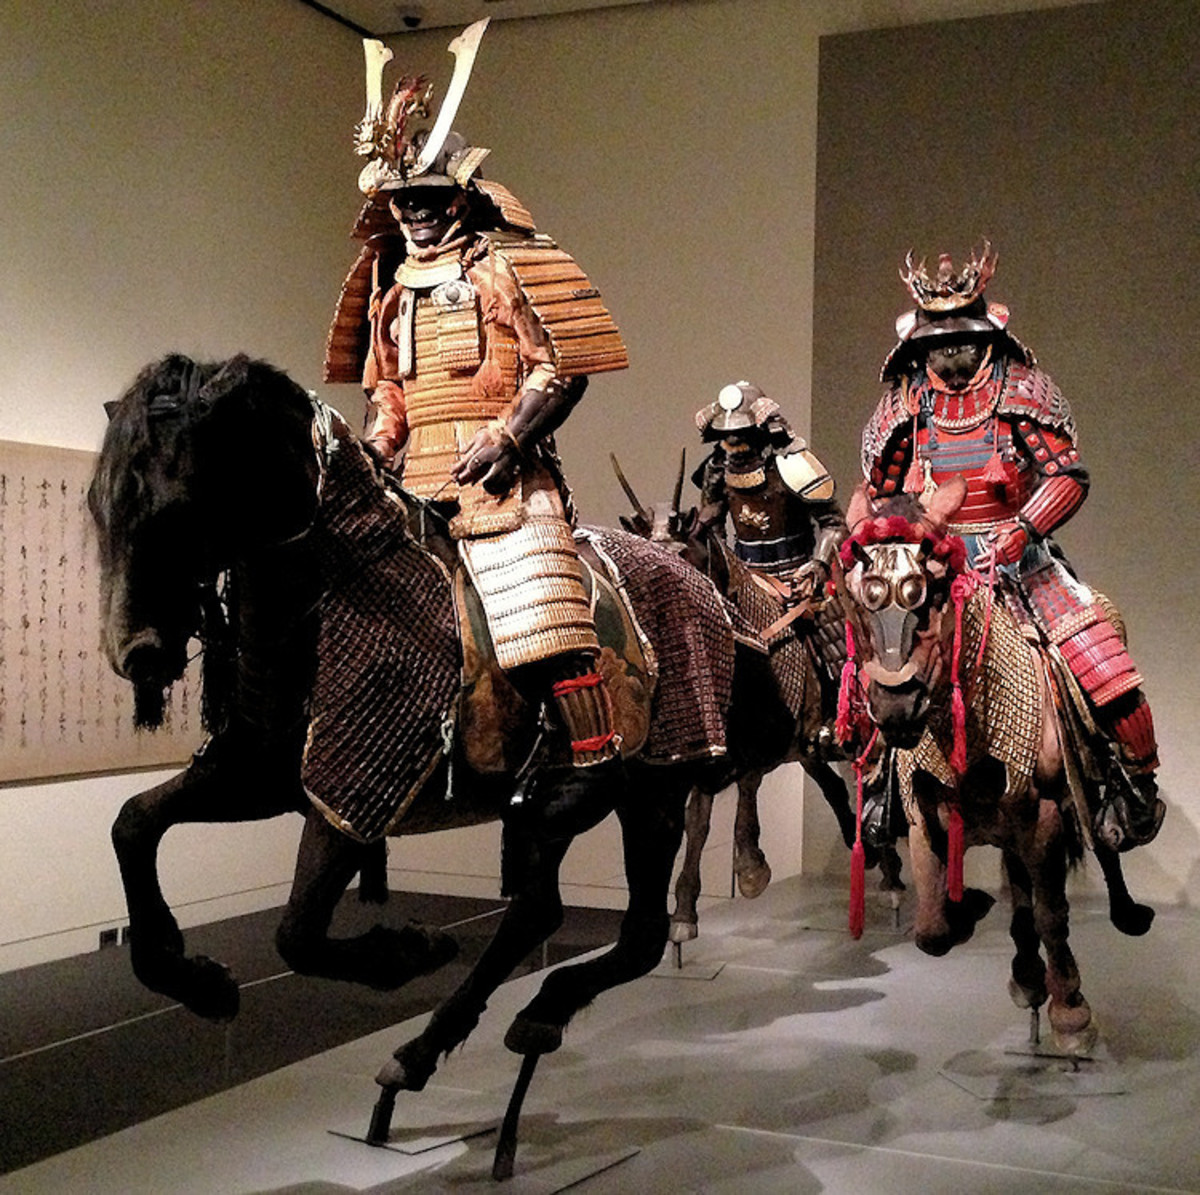 What Horse Breed did the Samurai Warriors Used